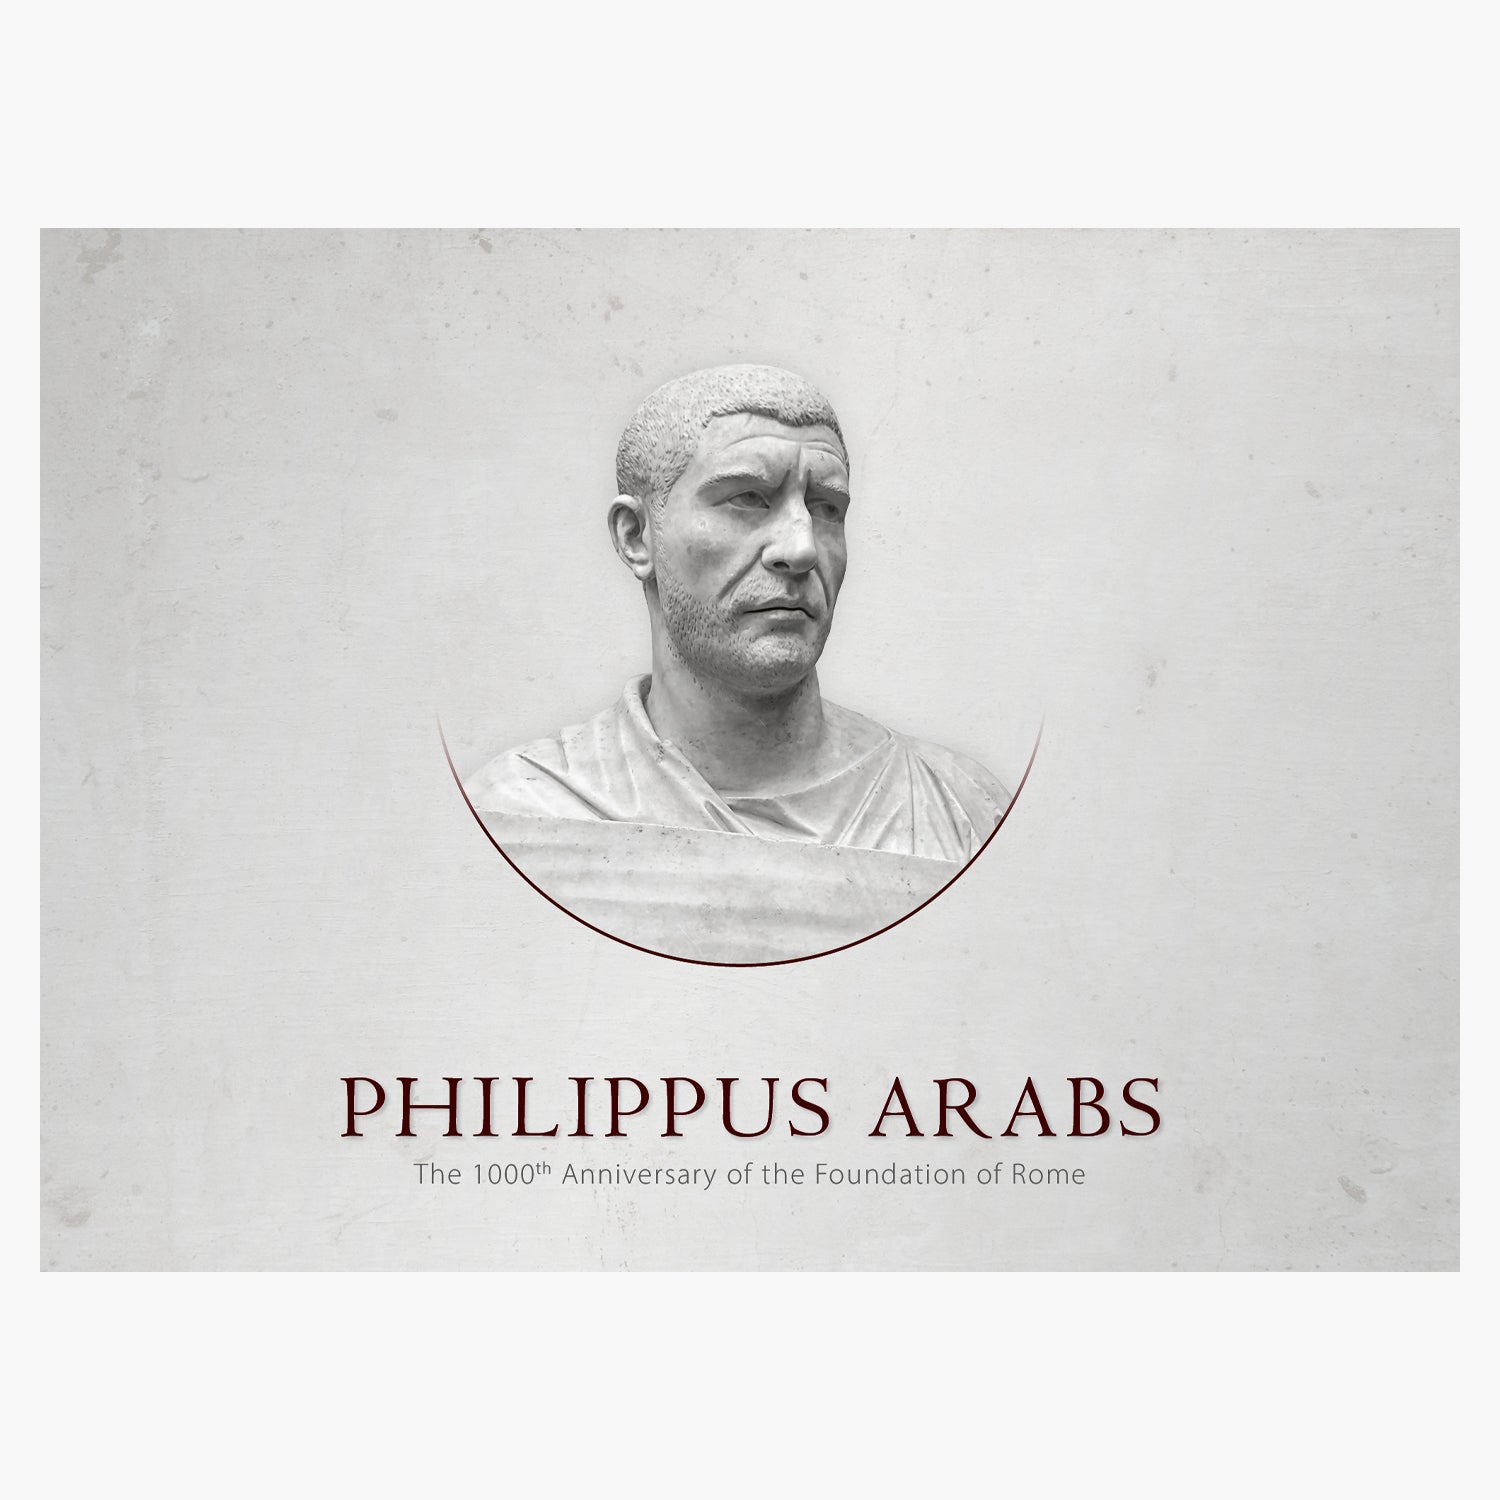 Emperor Philippus Arabs - The 1000th Anniversary of the Foundation of Rome